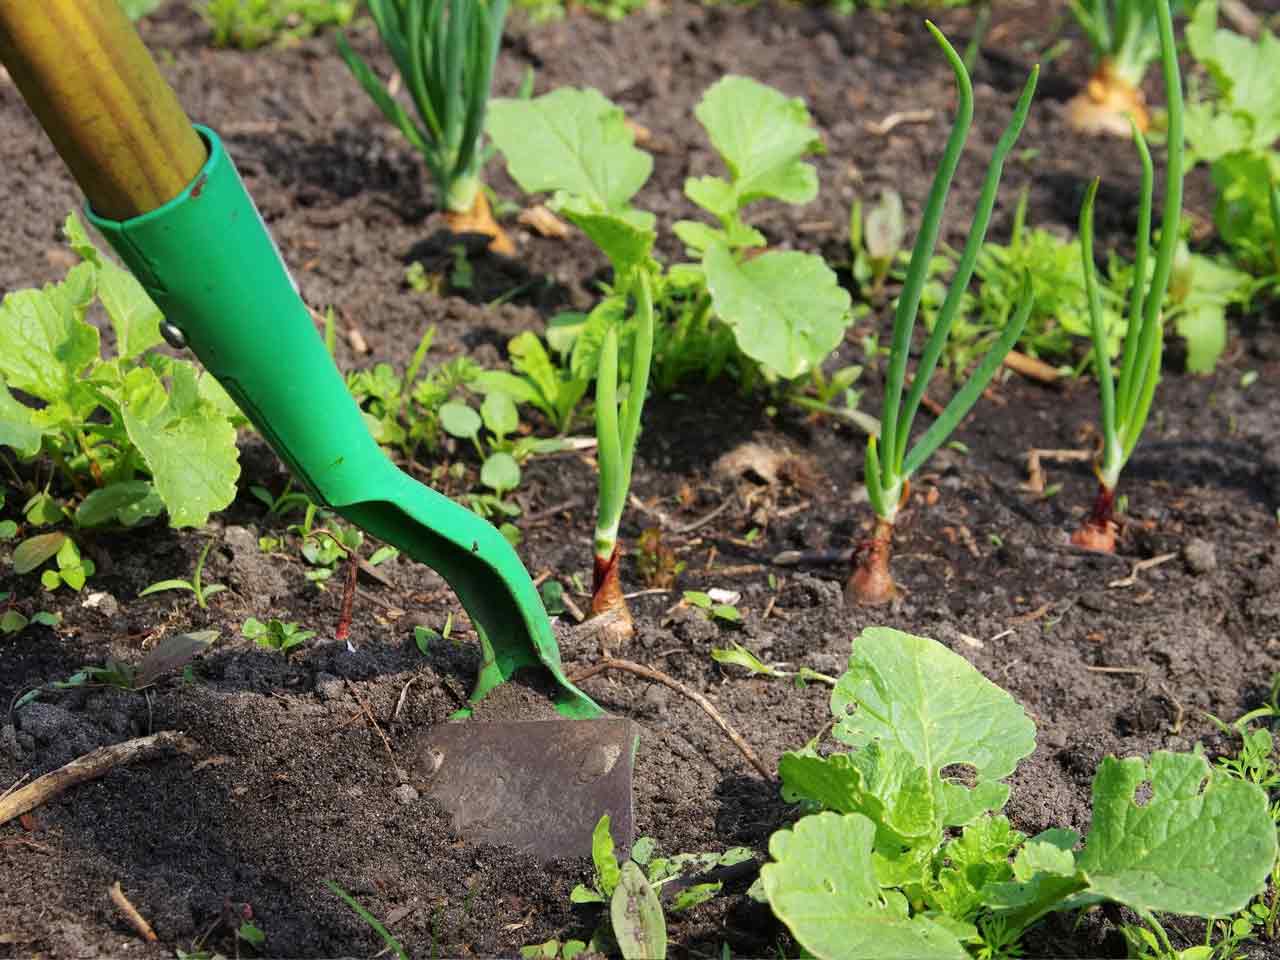 Digging a vegetable patch